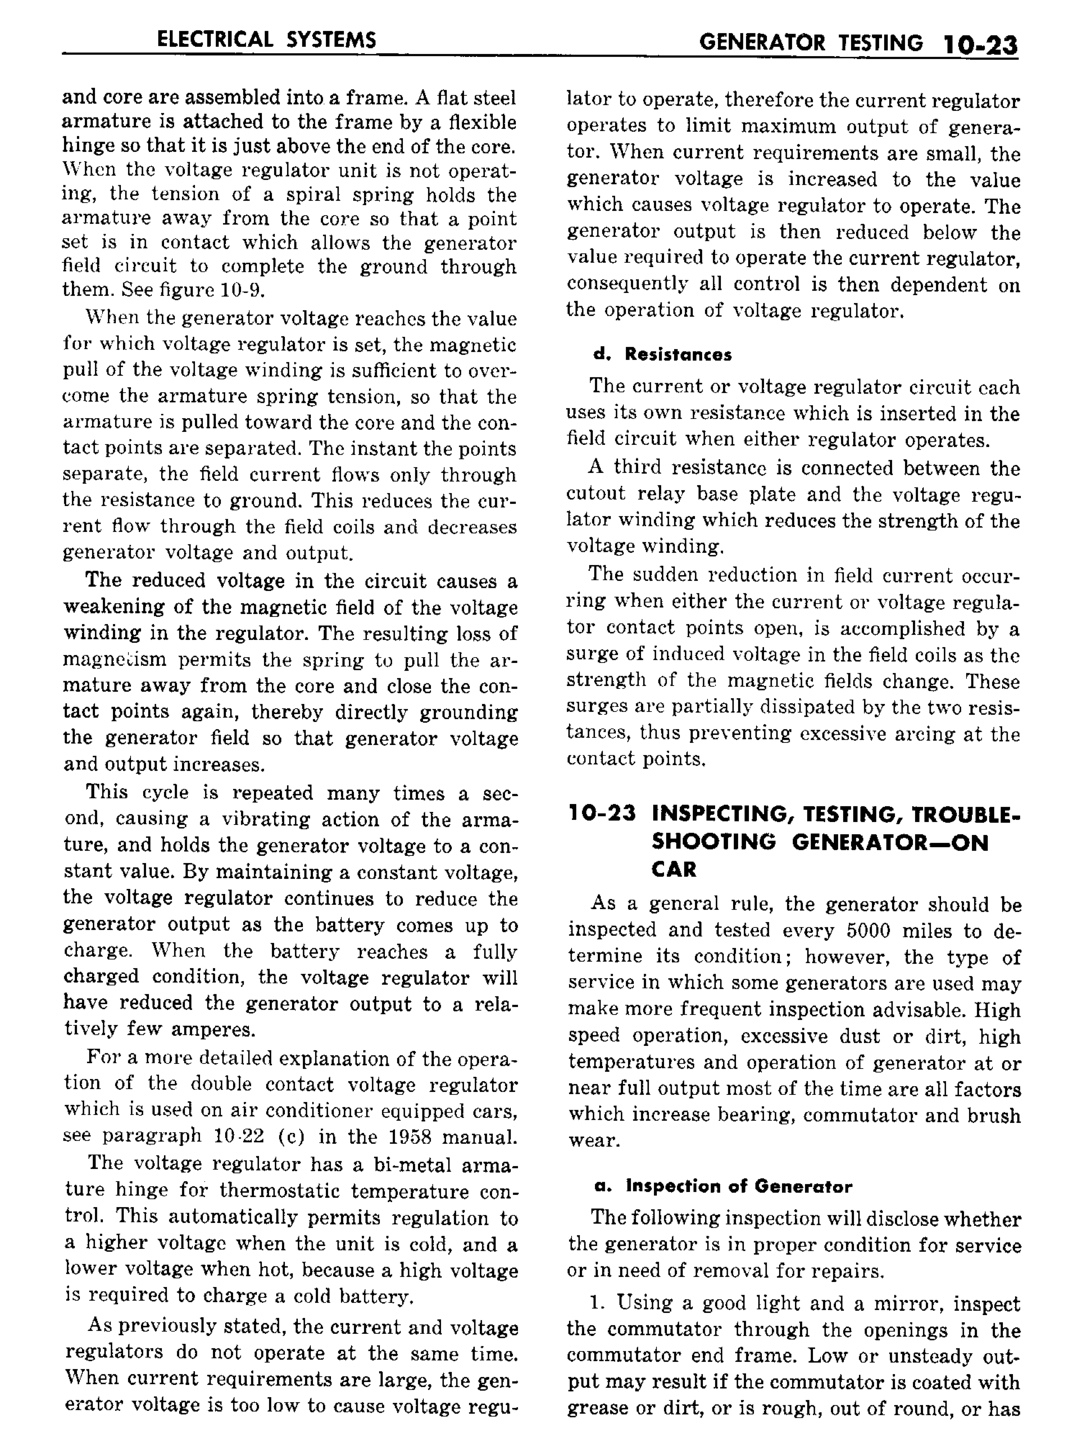 n_11 1960 Buick Shop Manual - Electrical Systems-023-023.jpg